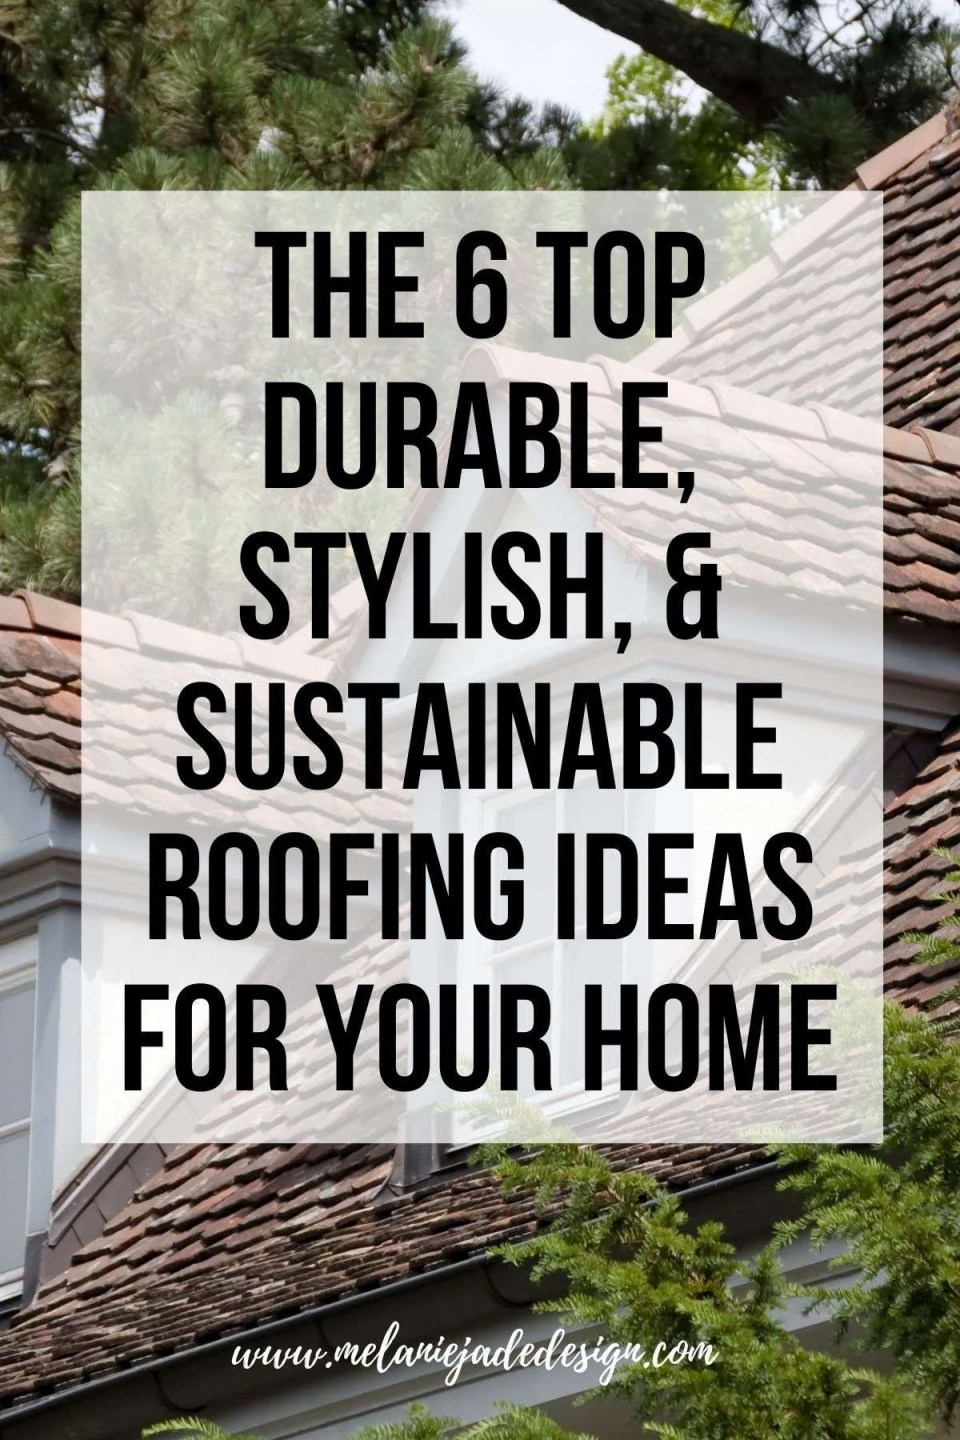 The 6 Top Durable, Stylish, and Sustainable Roofing Ideas for Your Home pinterest pin